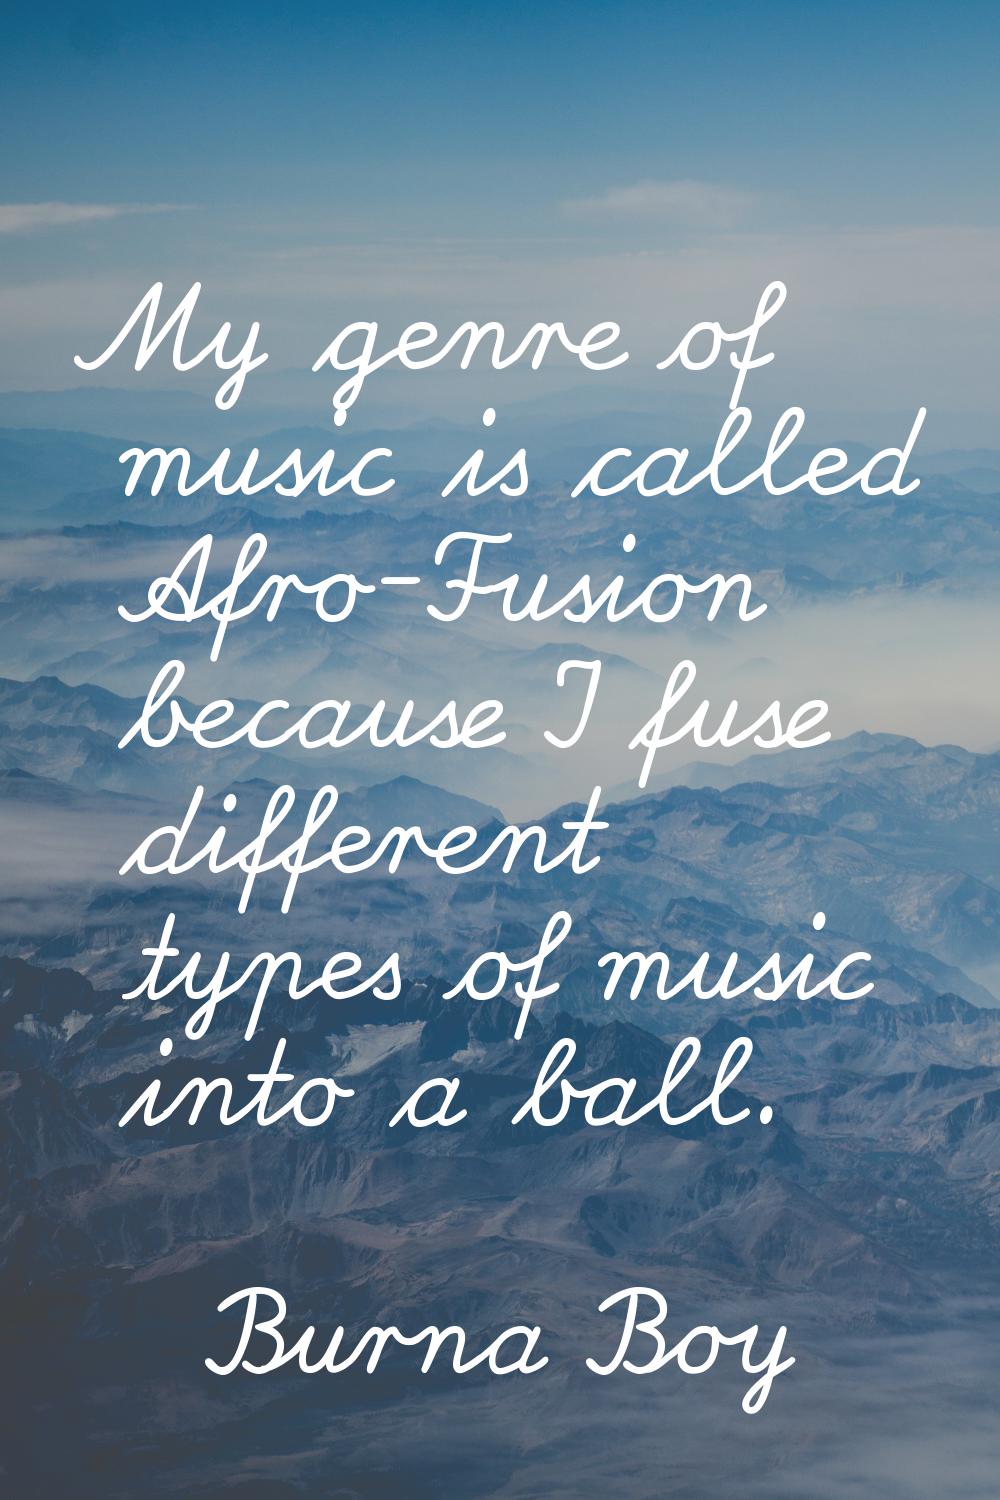 My genre of music is called Afro-Fusion because I fuse different types of music into a ball.